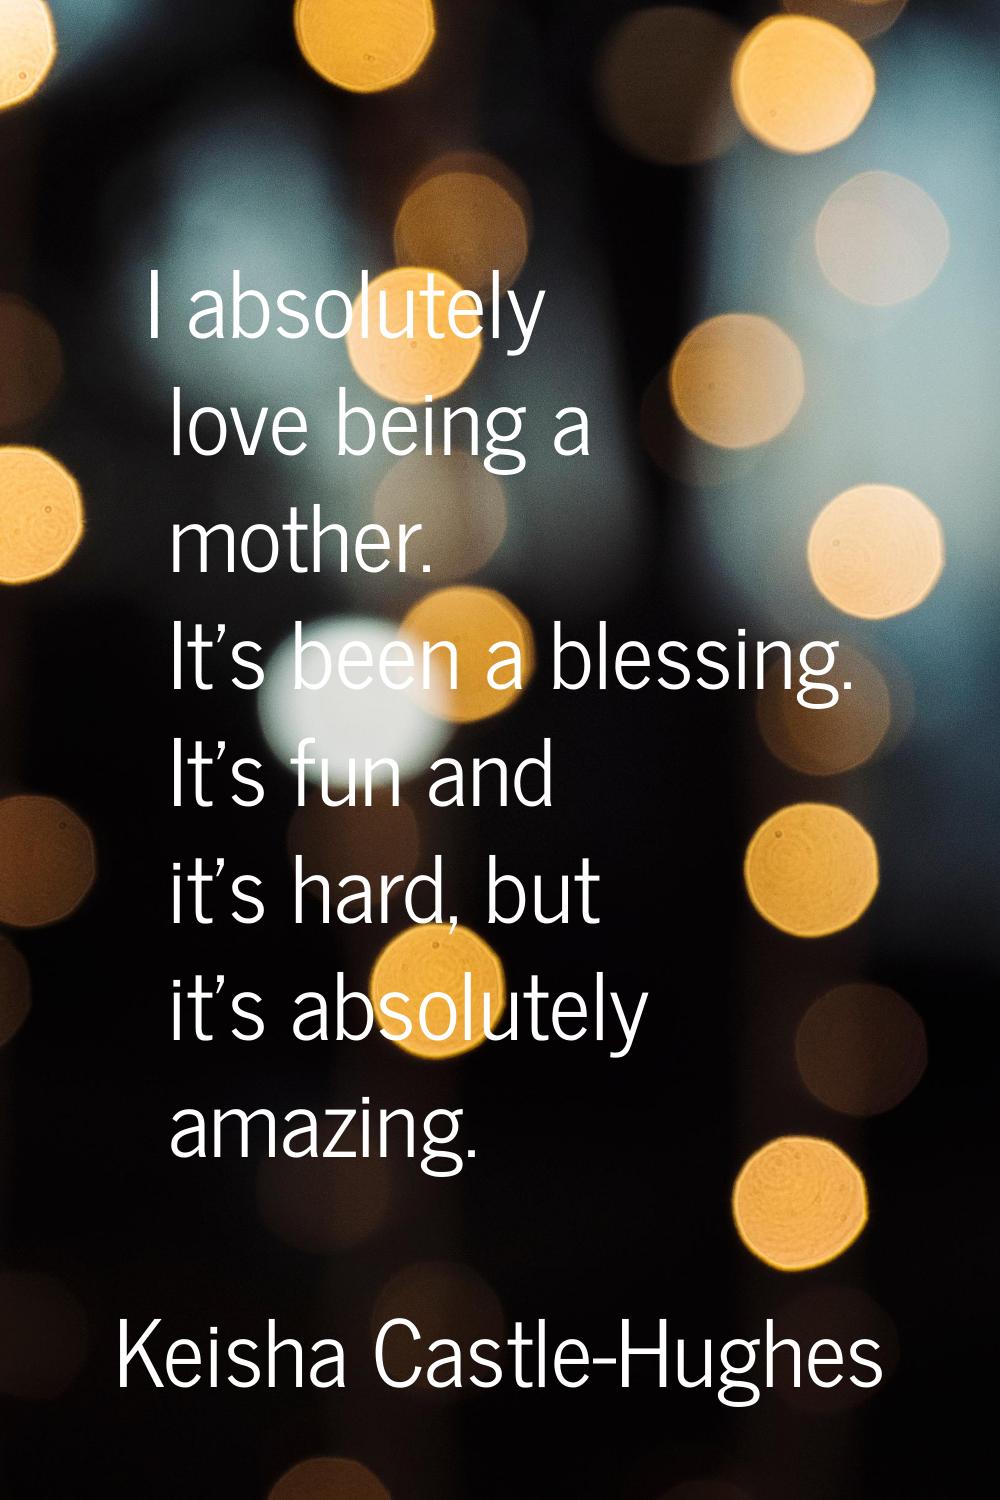 I absolutely love being a mother. It's been a blessing. It's fun and it's hard, but it's absolutely